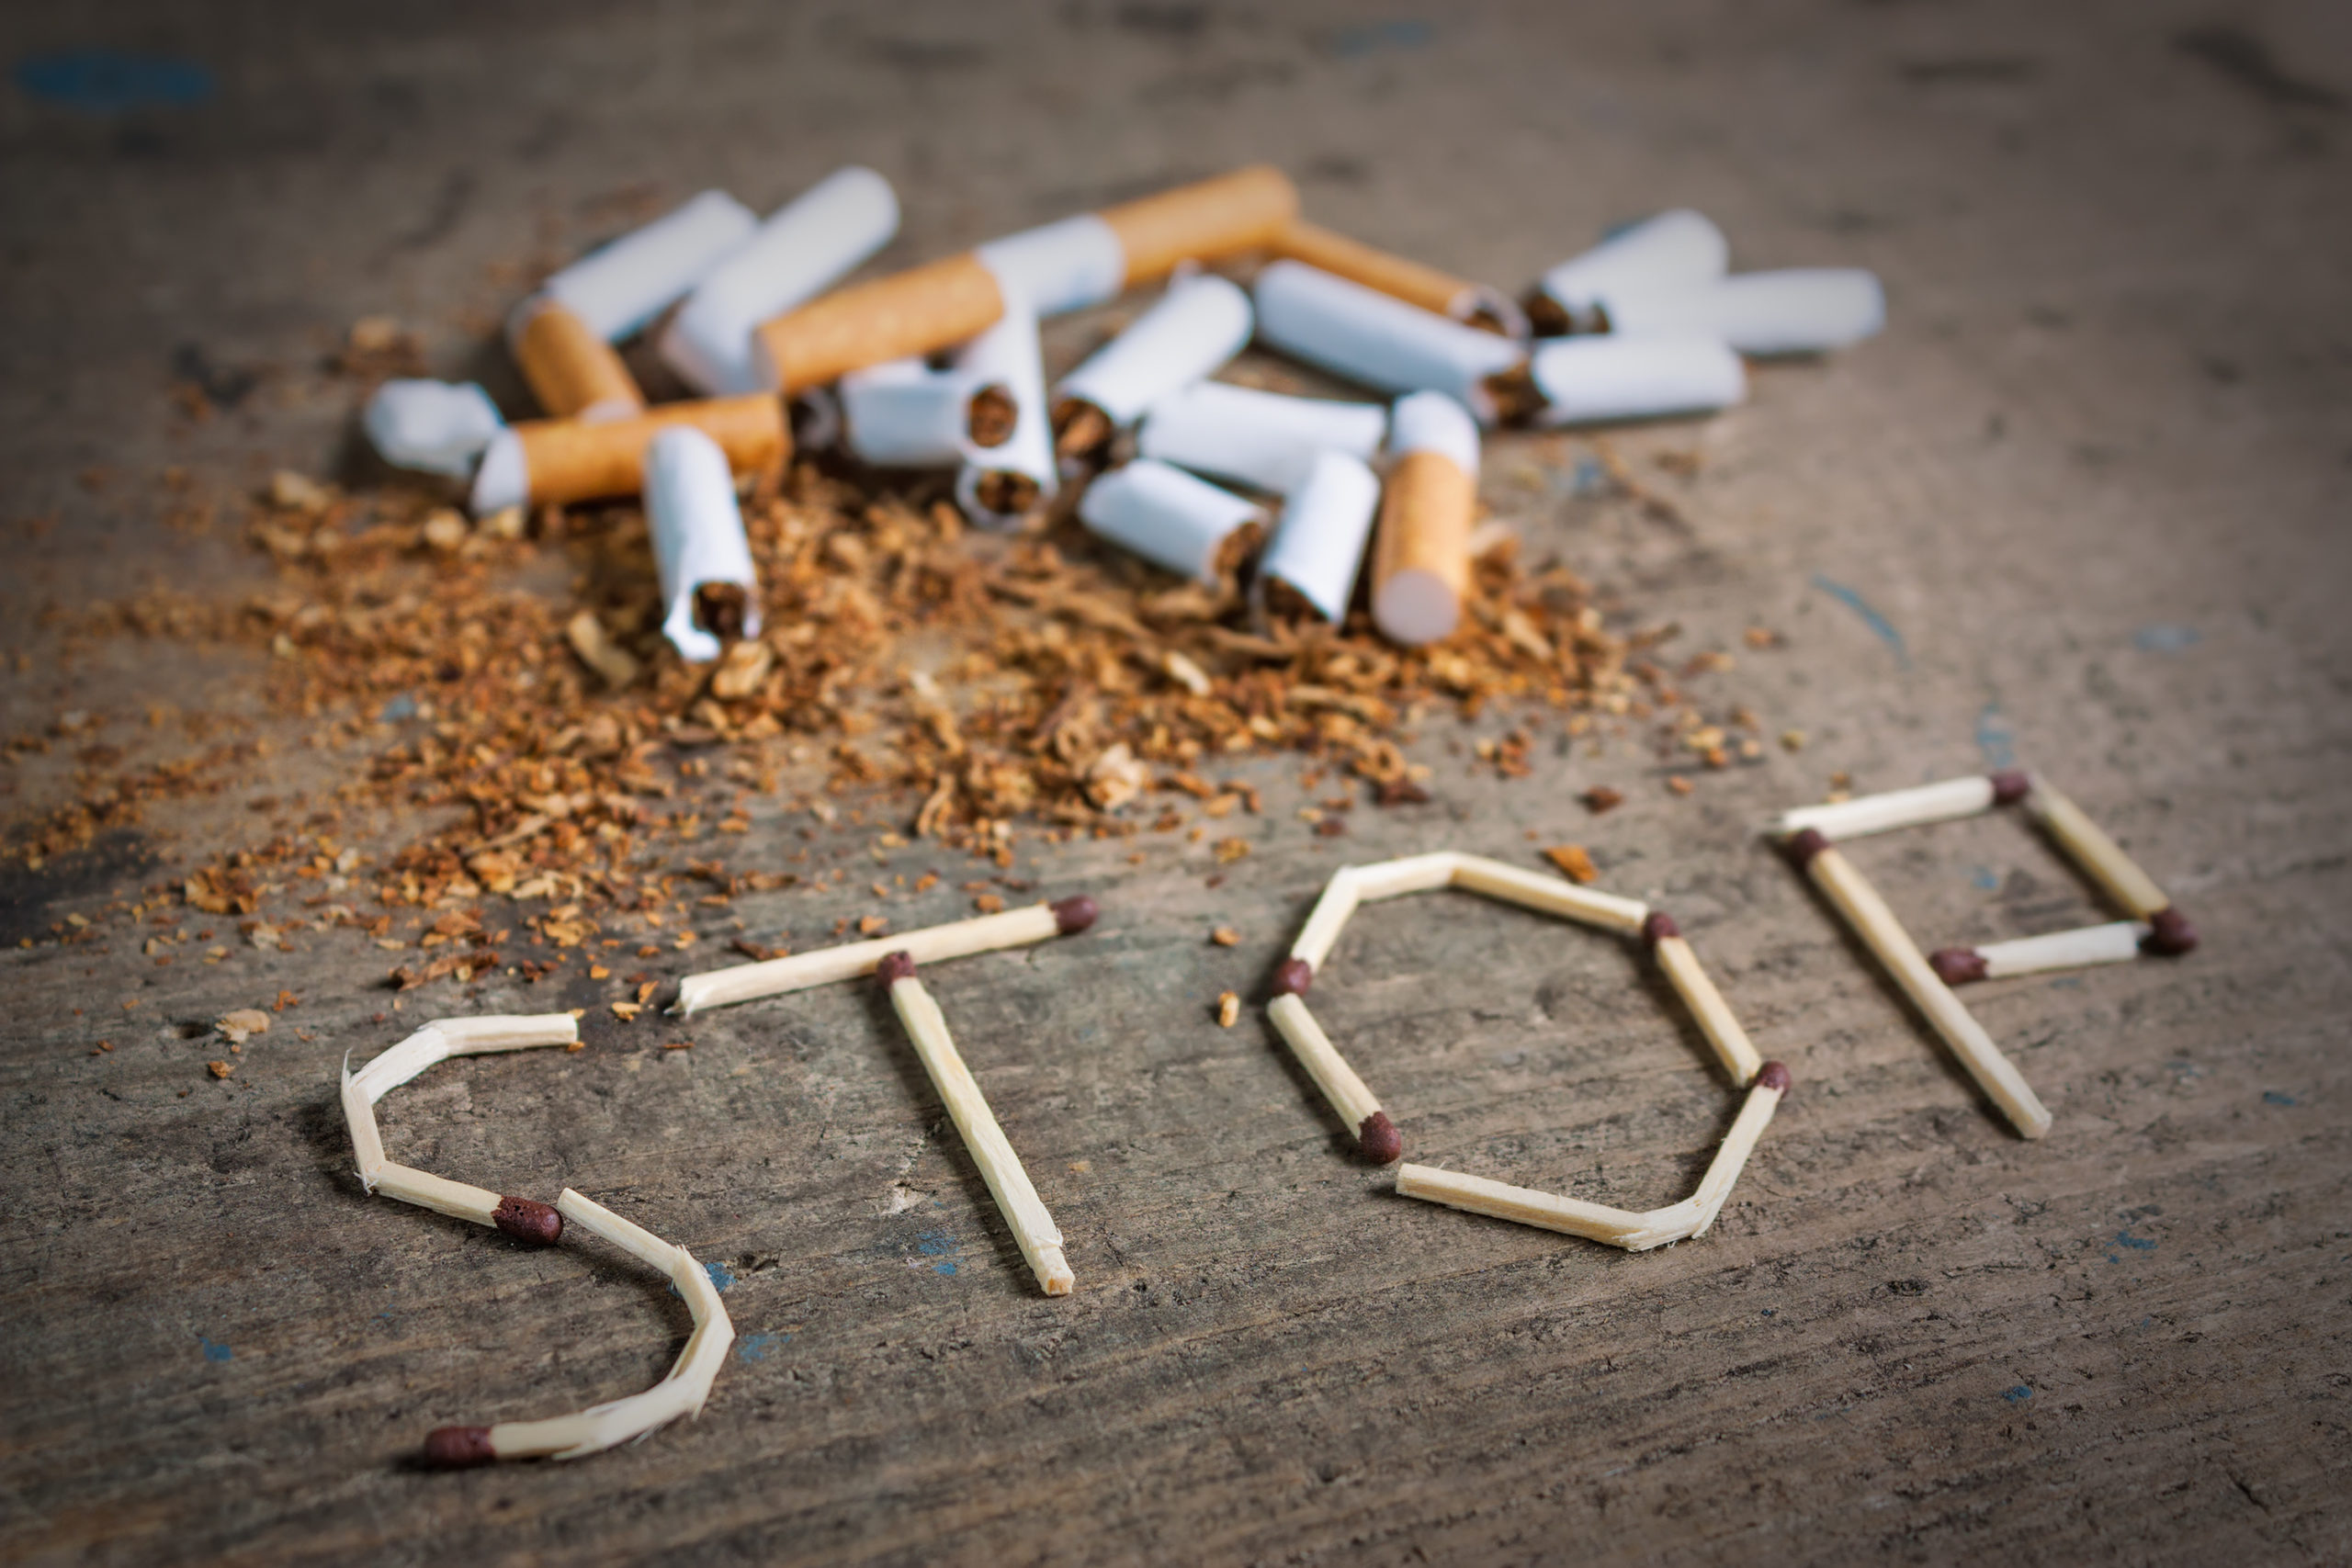 Broken cigarettes and tobacco. Quit smoking now